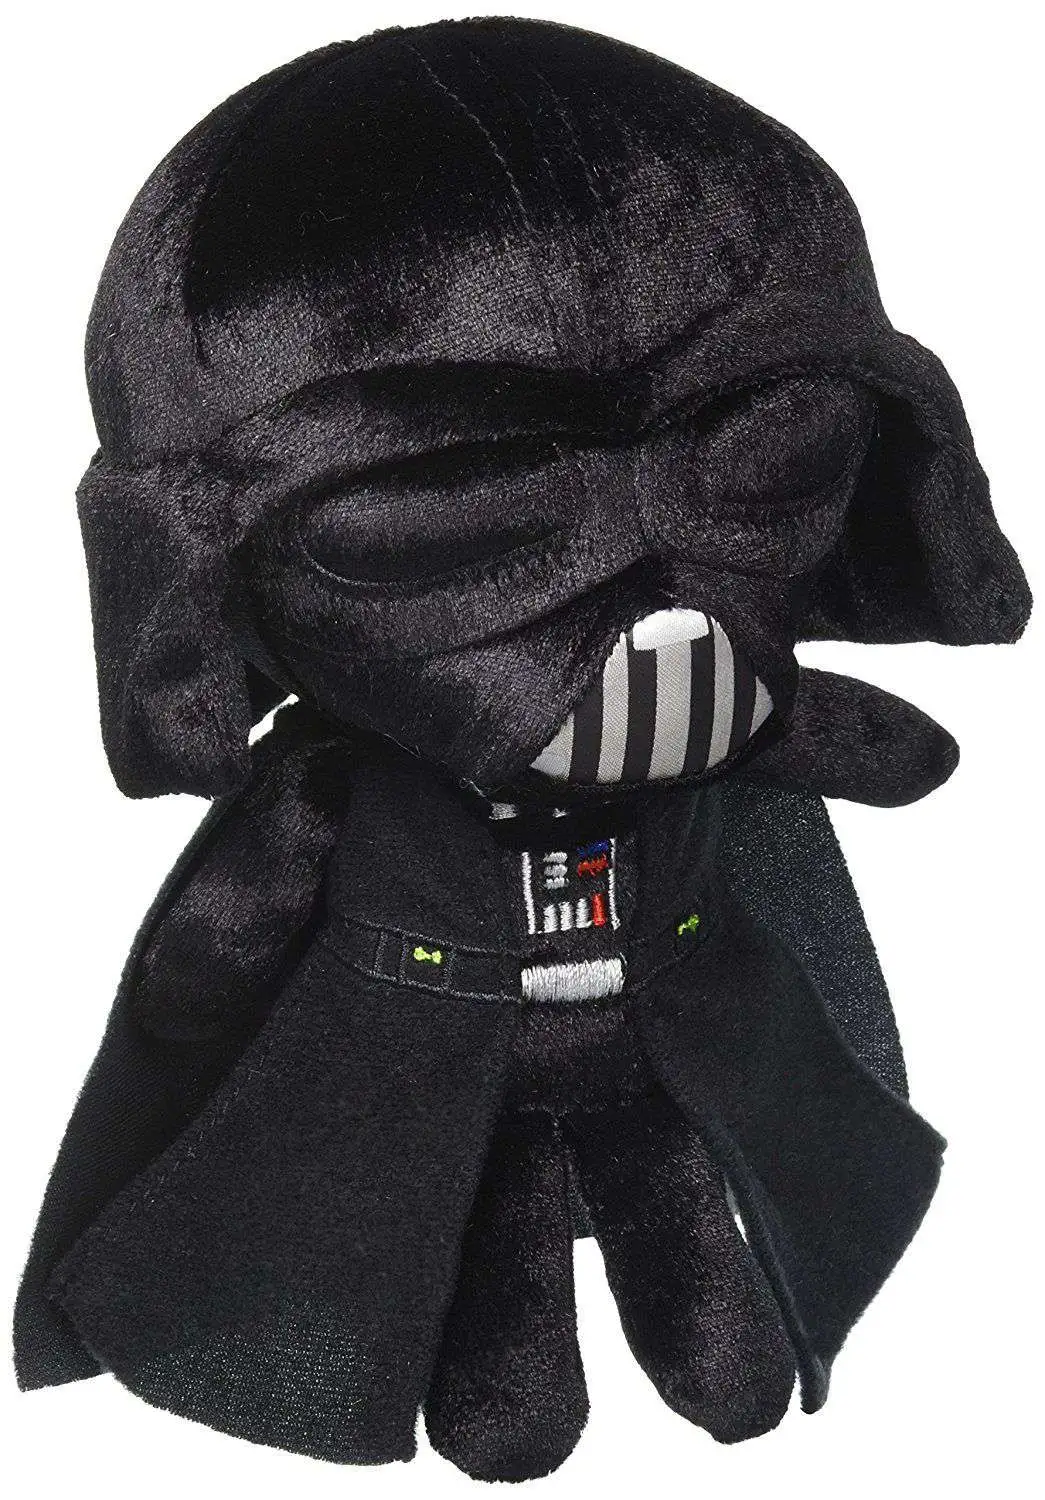 New Star Wars Galactic Plushies Plush Doll Darth Vader Figure  by Funko 